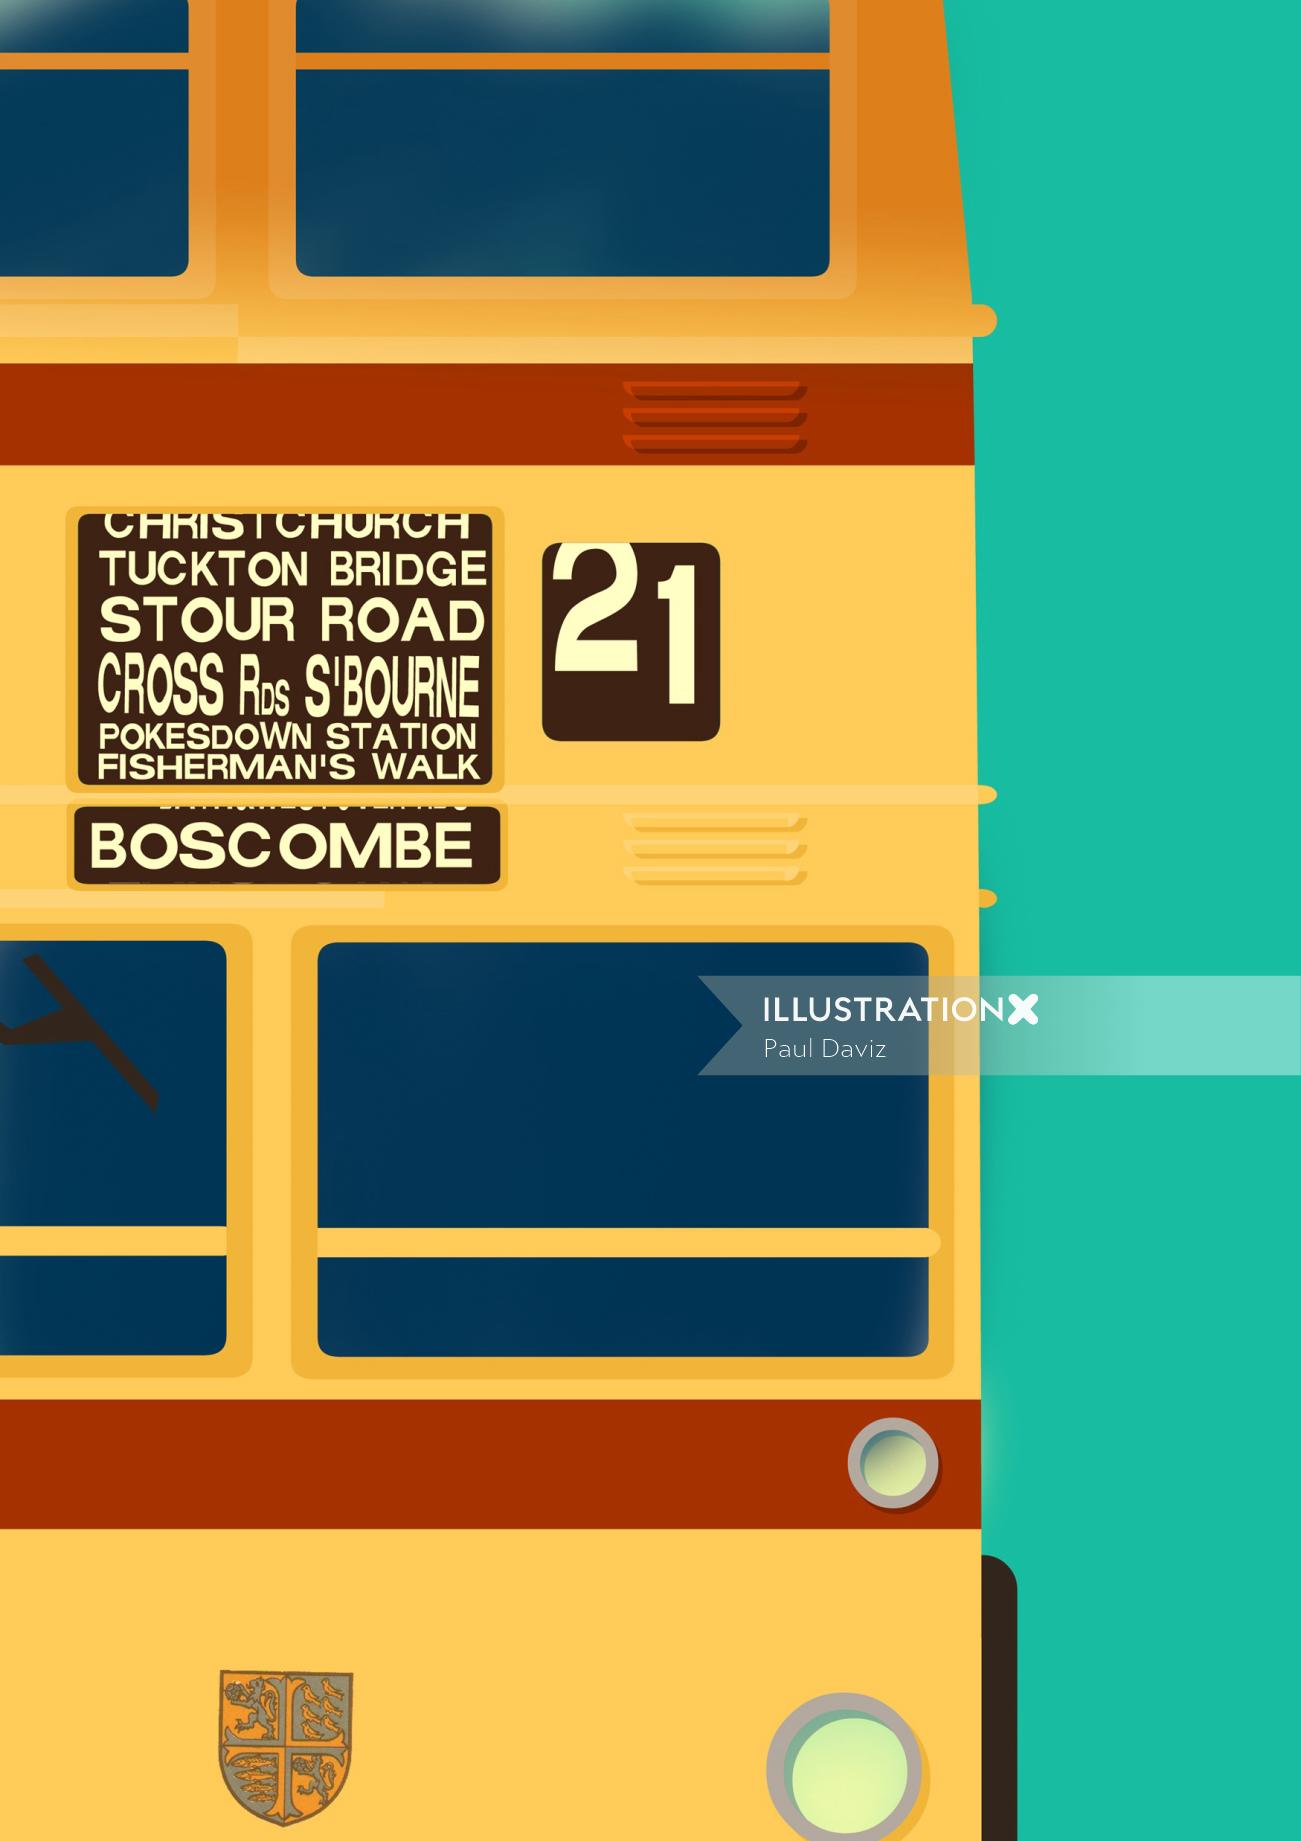 Computer generated Boscombe Bus
